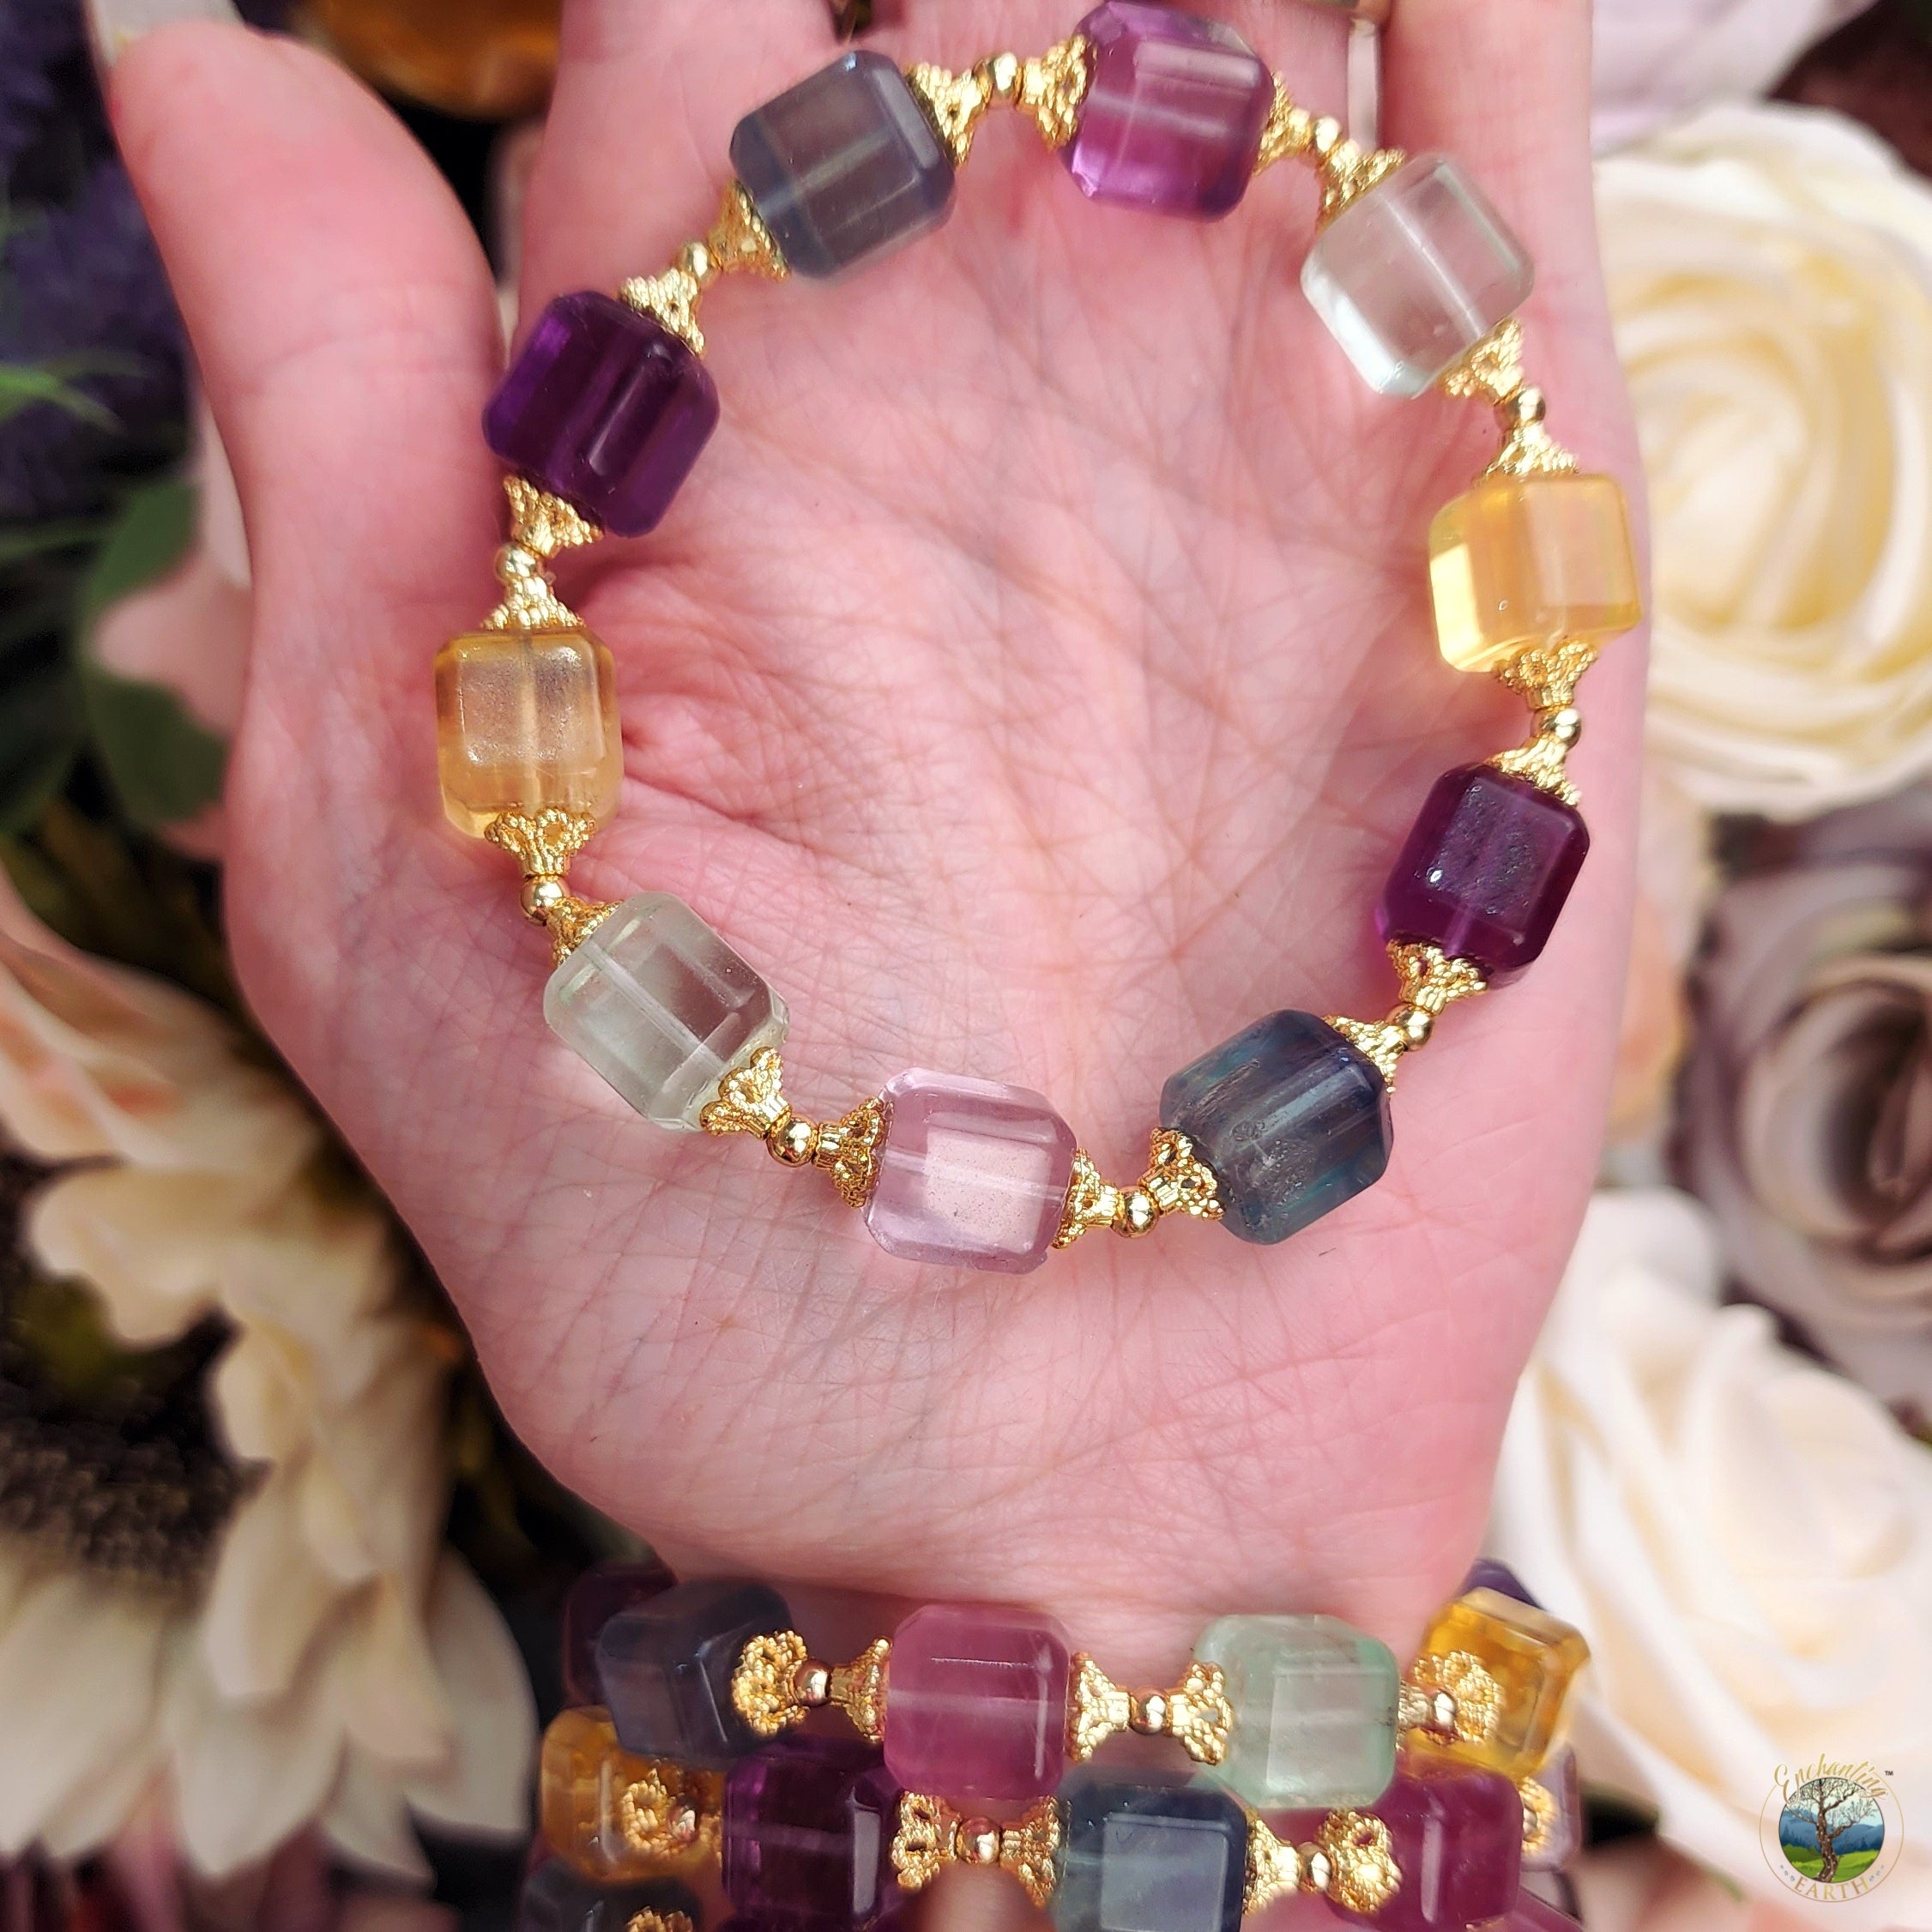 Fluorite Cube Vintage Style Bracelet for Focus, Learning and Mental Clarity